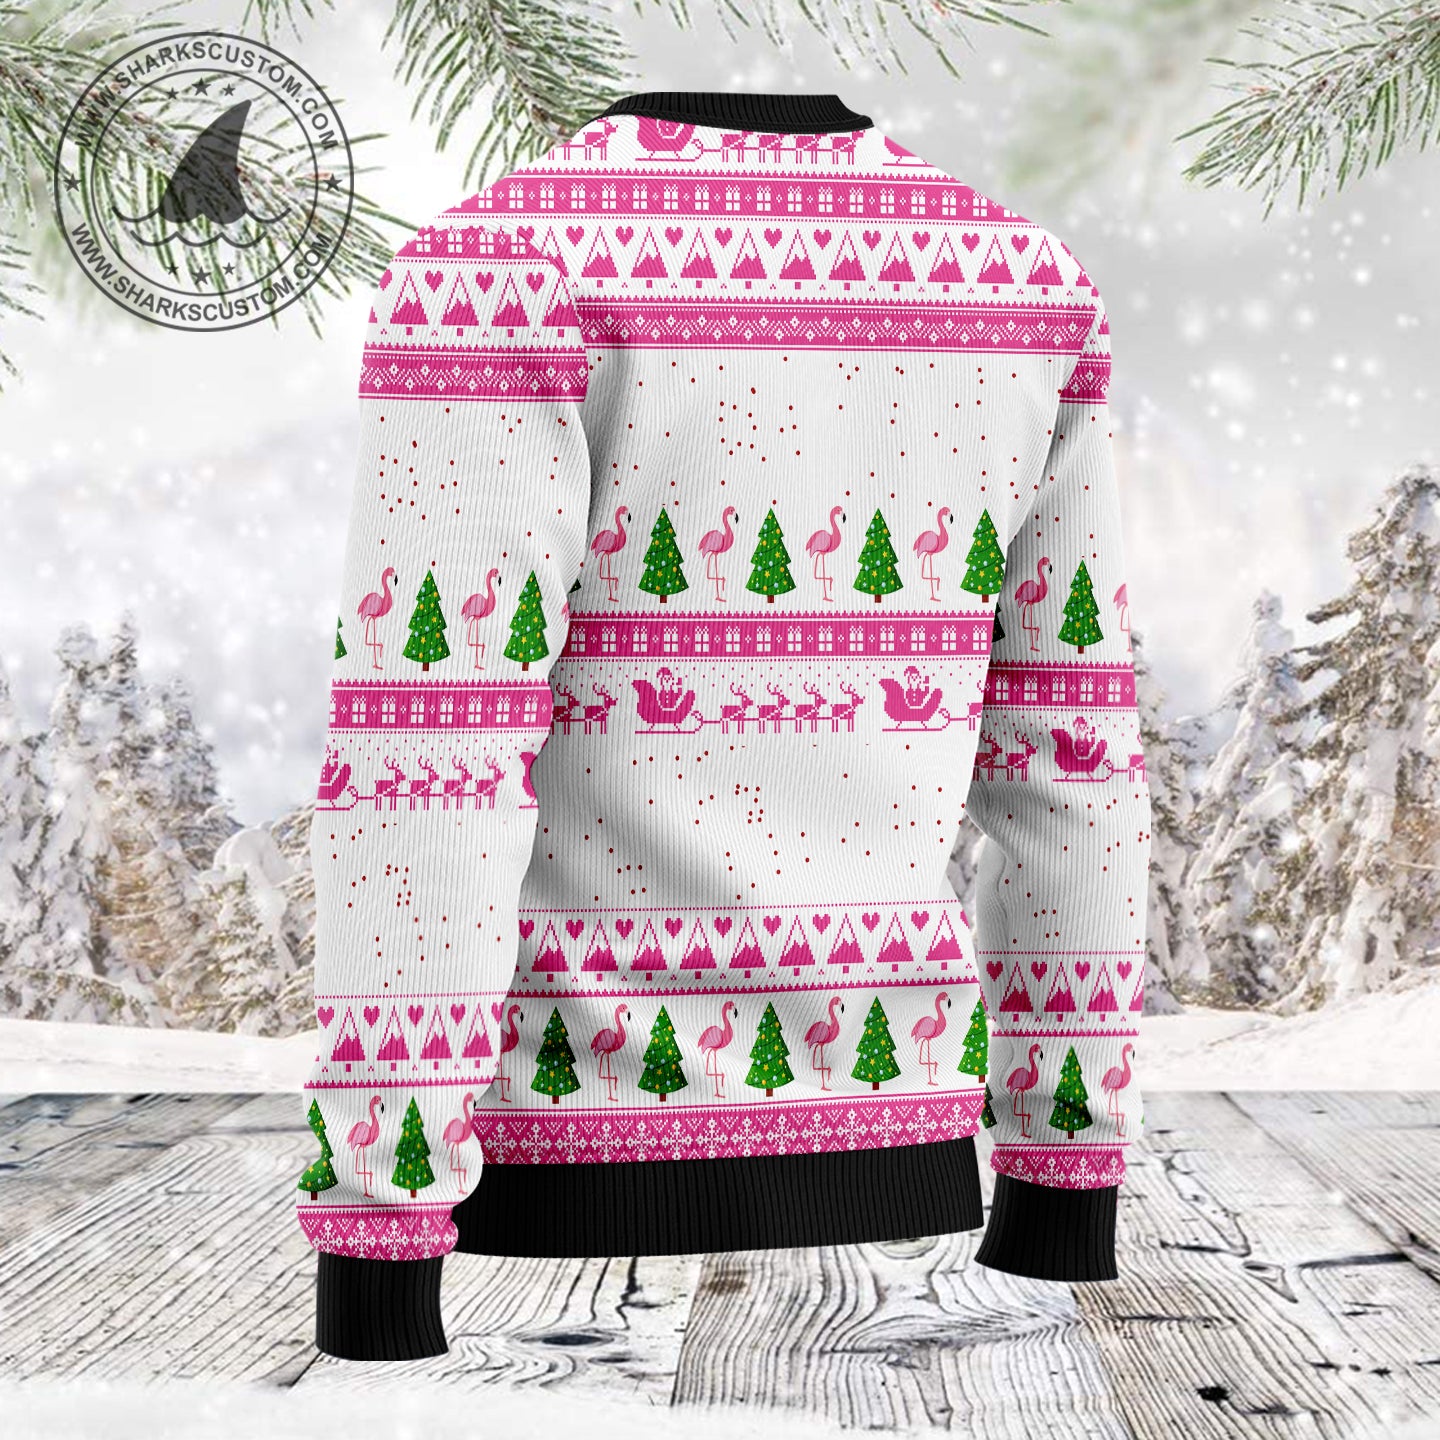 Merry Pinkmas TG51210 - Ugly Christmas Sweater unisex womens & mens, couples matching, friends, flamingo lover, funny family sweater gifts (plus size available)